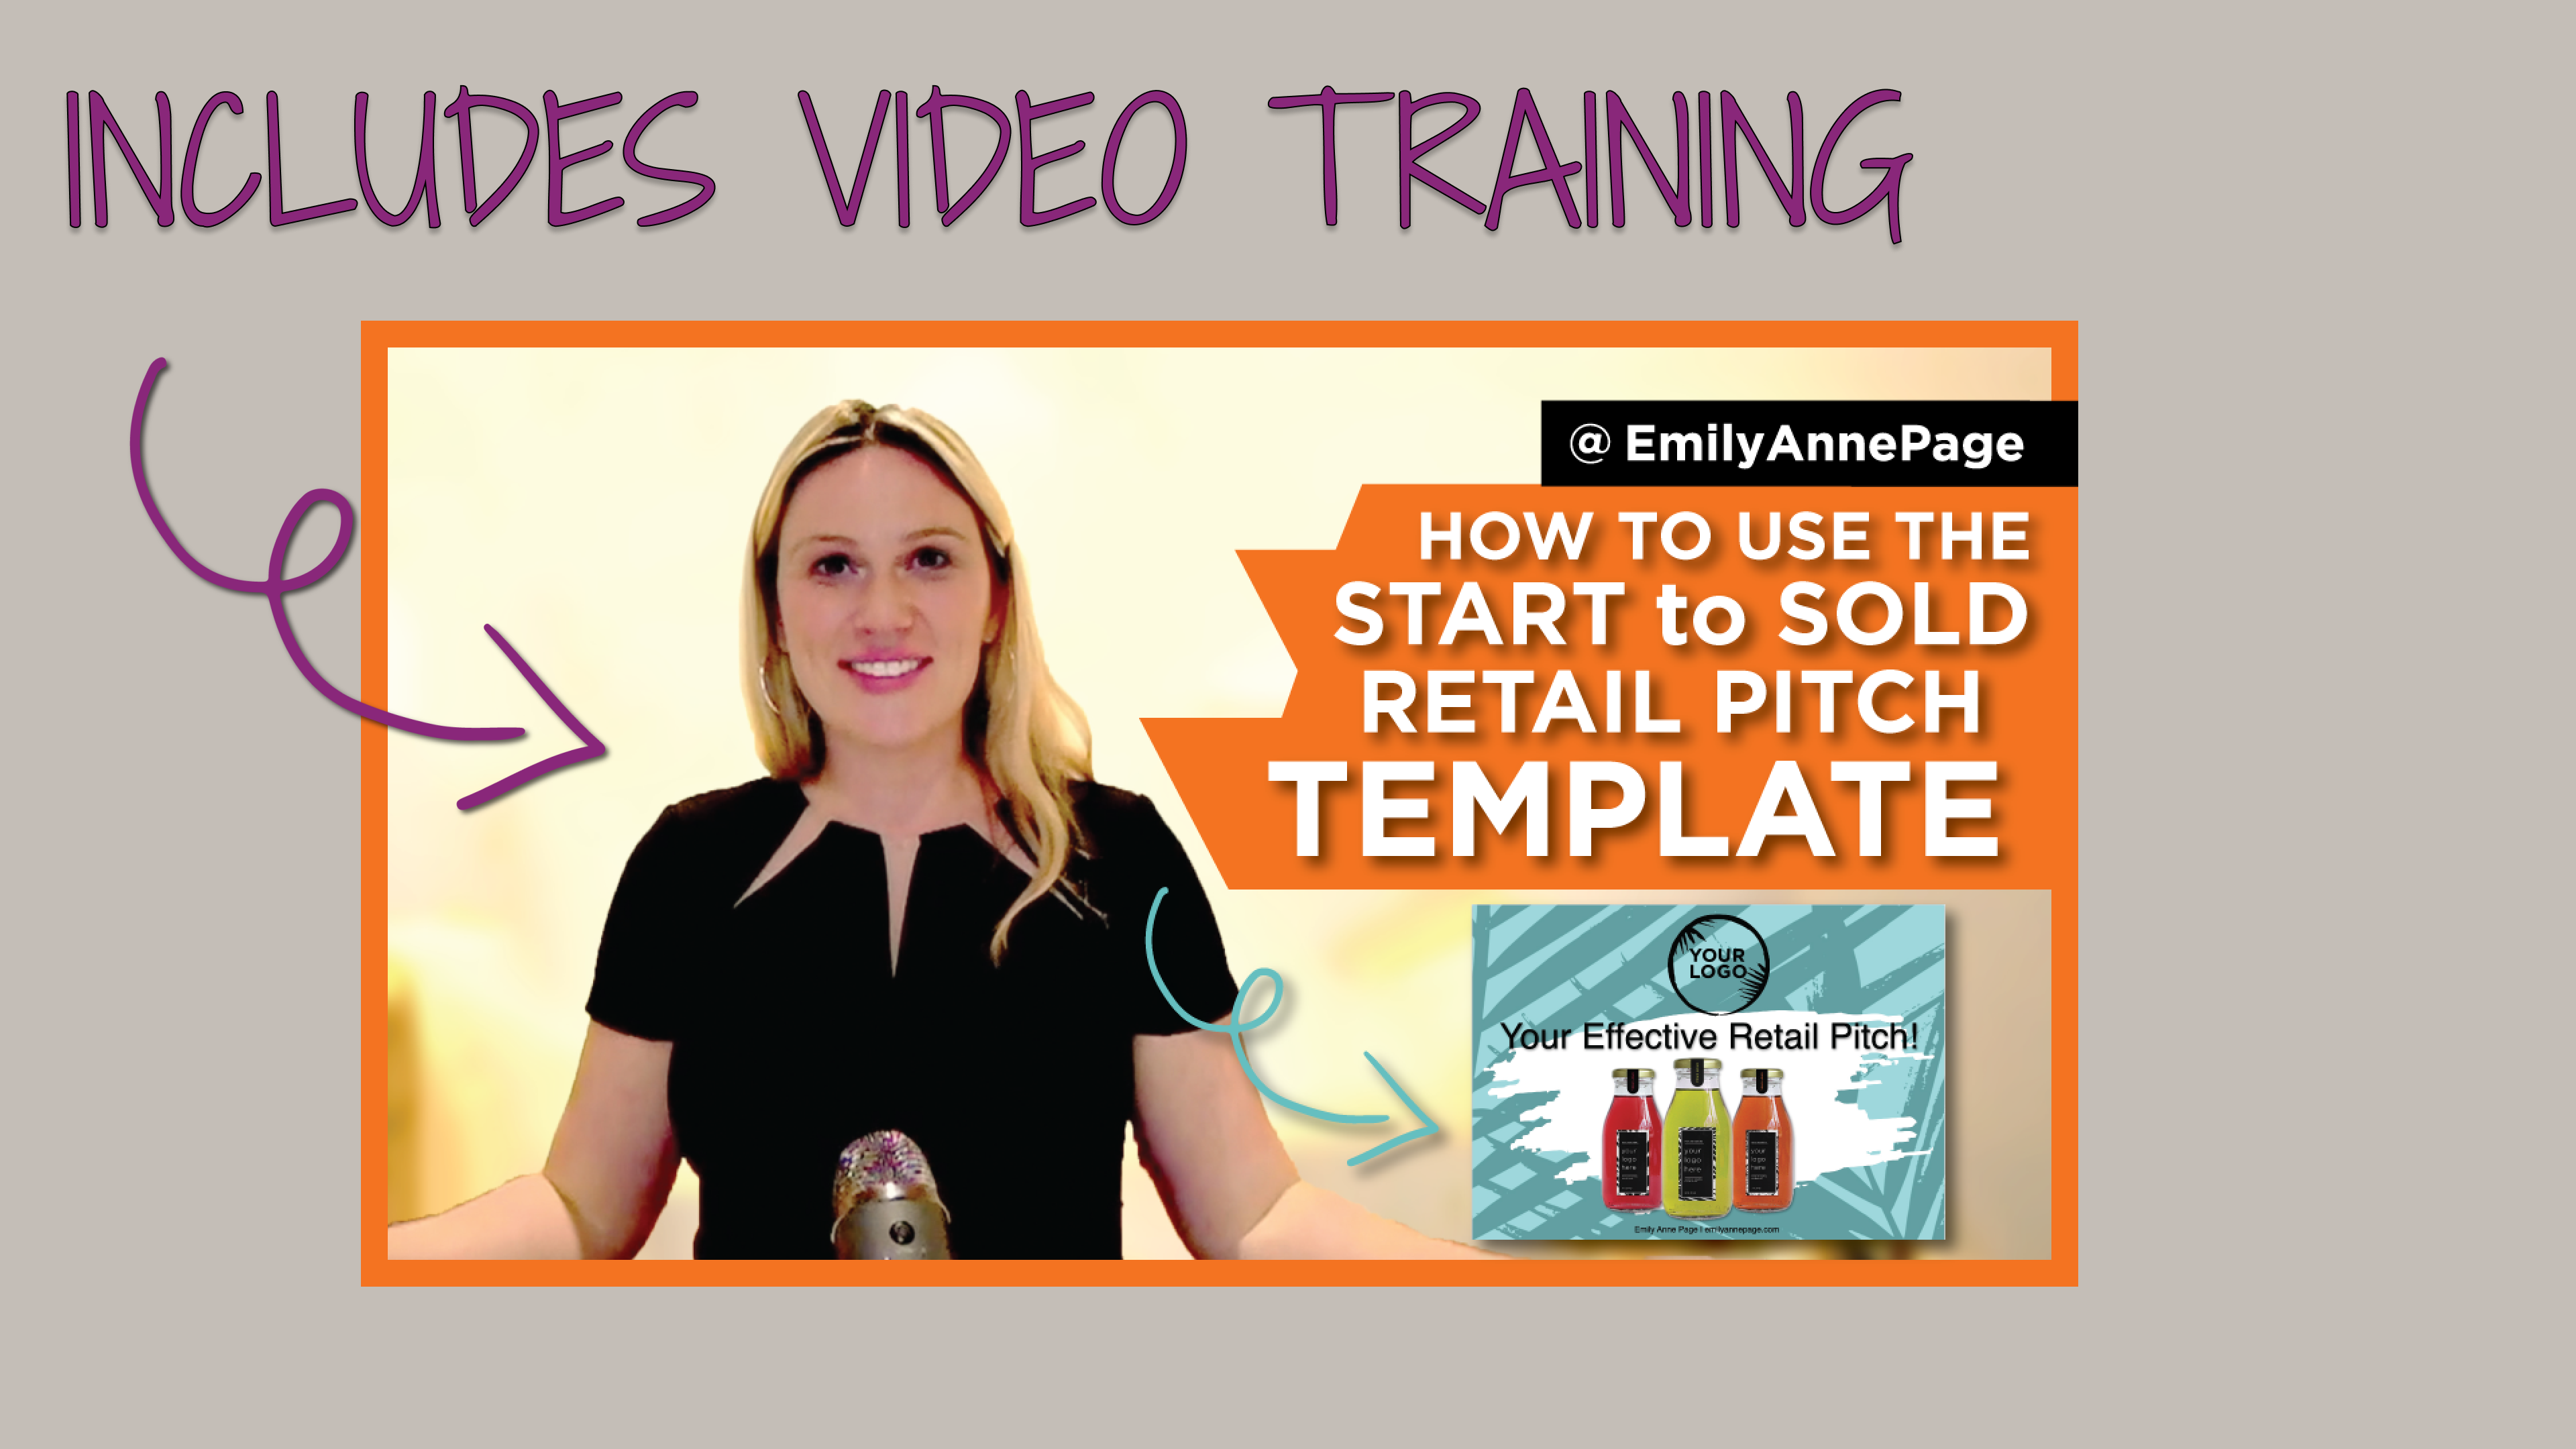 EPGC.StartToSold Retail Pitch Template_TRAINING INCLUDED